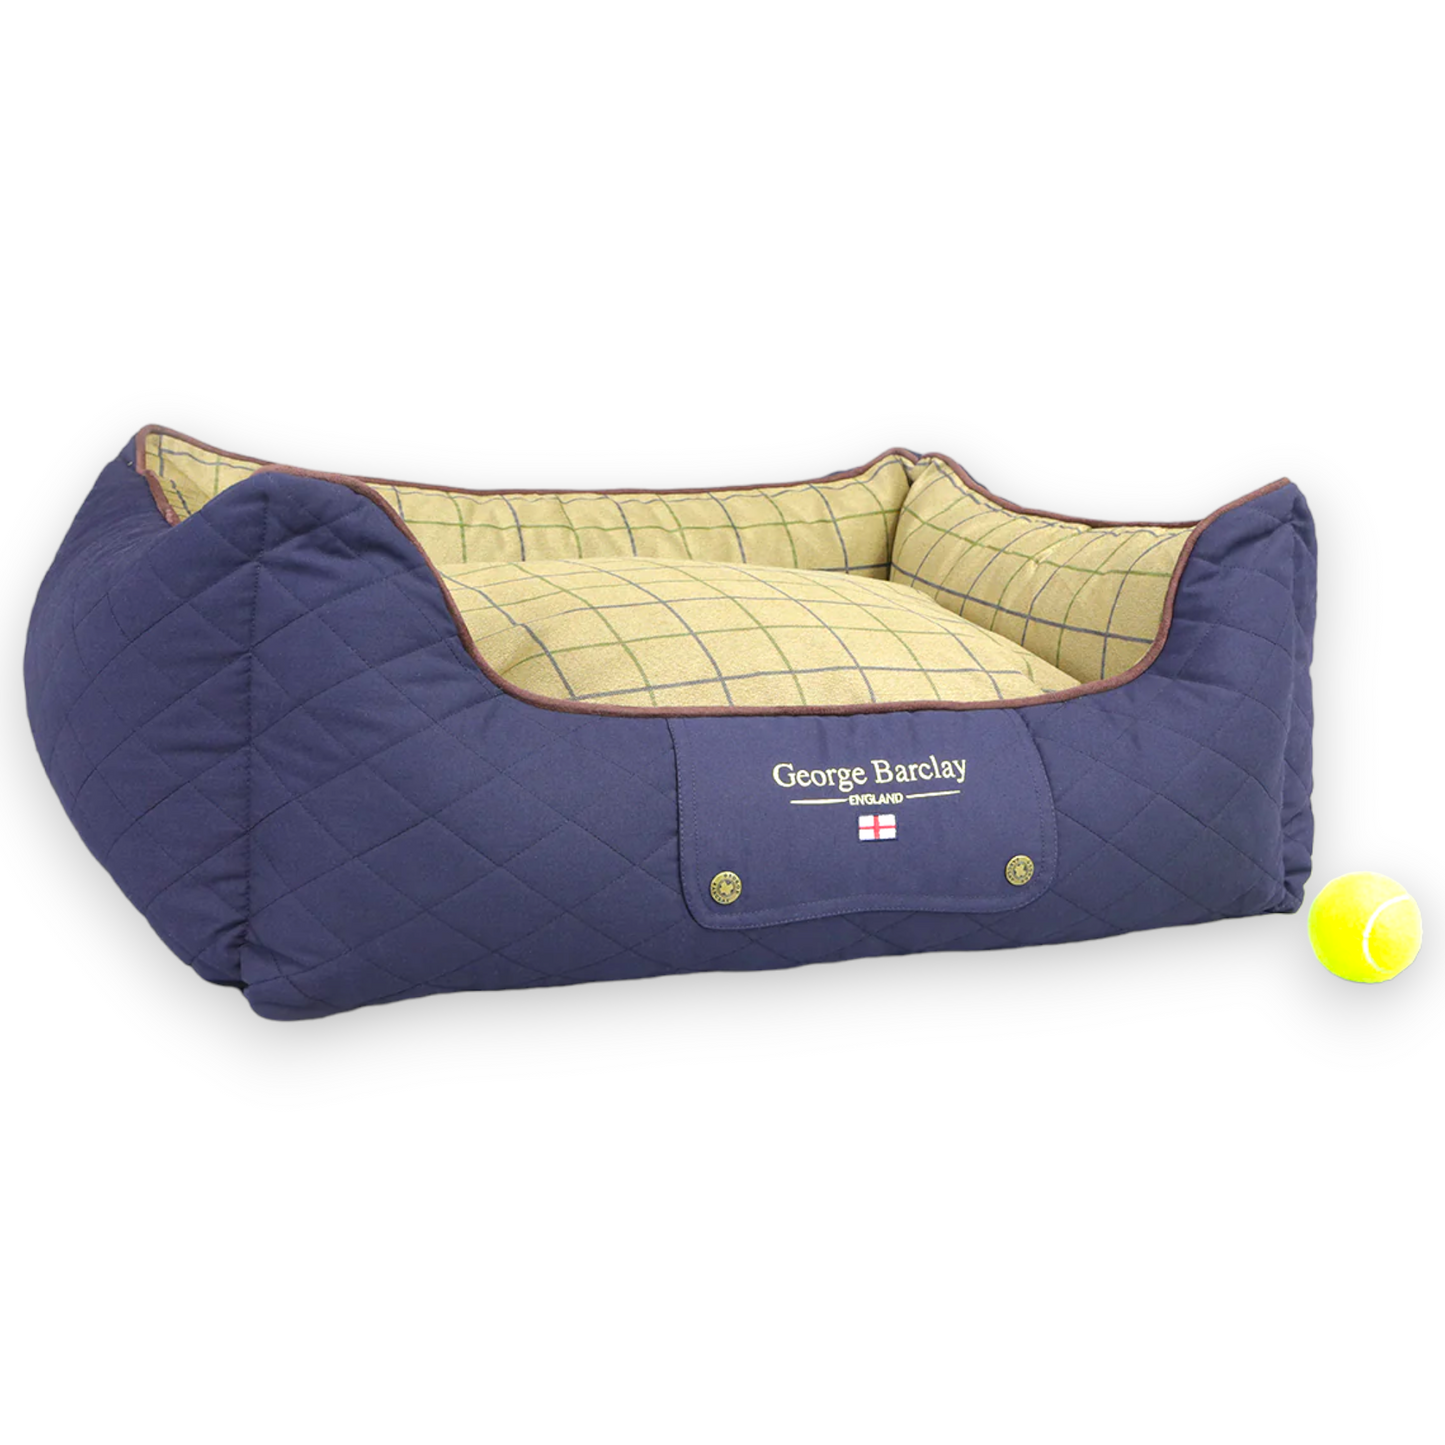 George Barclay Country Box Bed - Midnight Blue - Dog Bed